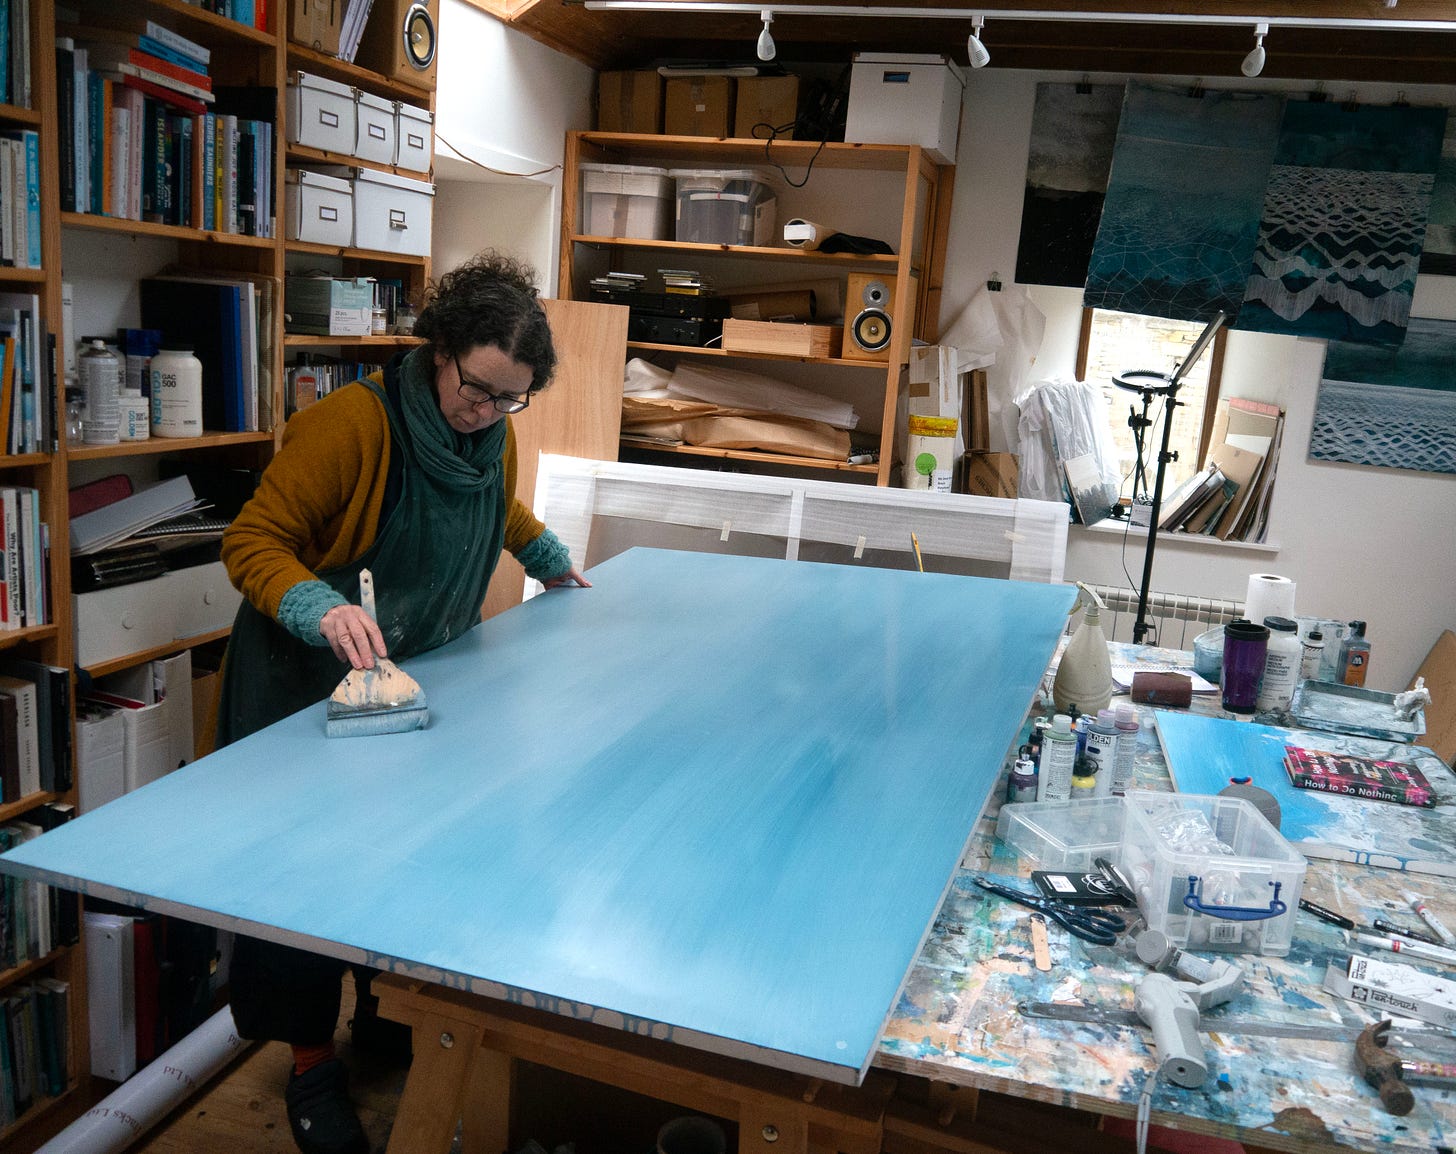 The artis painting a layer of blue onto a large panel laid over a workbench